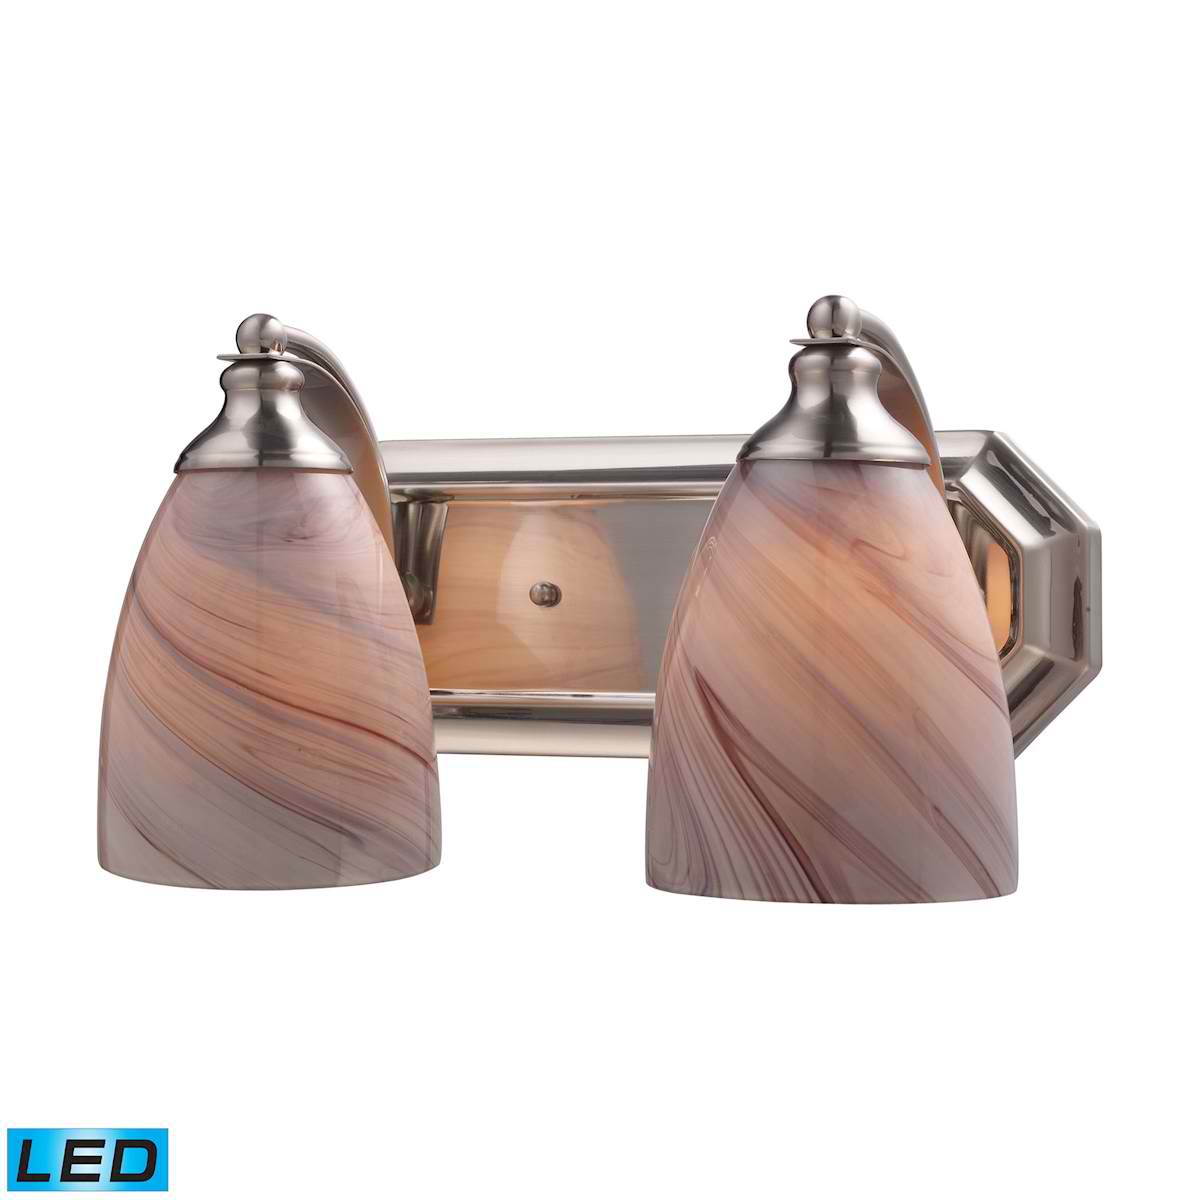 2 Light Vanity in Satin Nickel and Creme Glass - LED, 800 Lumens (1600 Lumens Total) with Full Scale